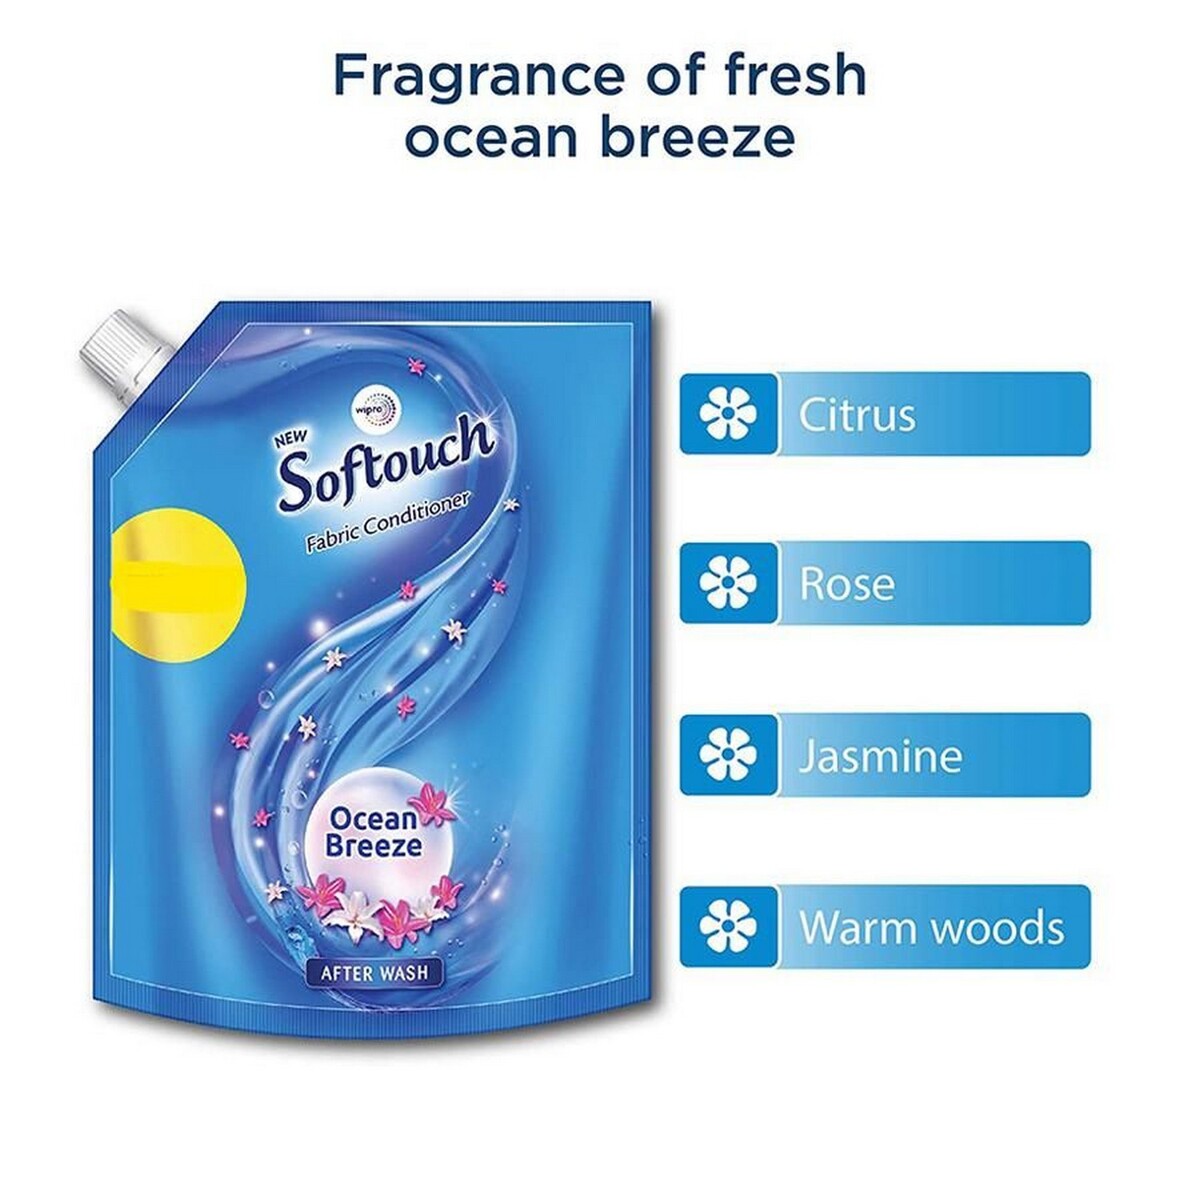 Softouch  Fabric Conditioner  Blue 2L Pouch